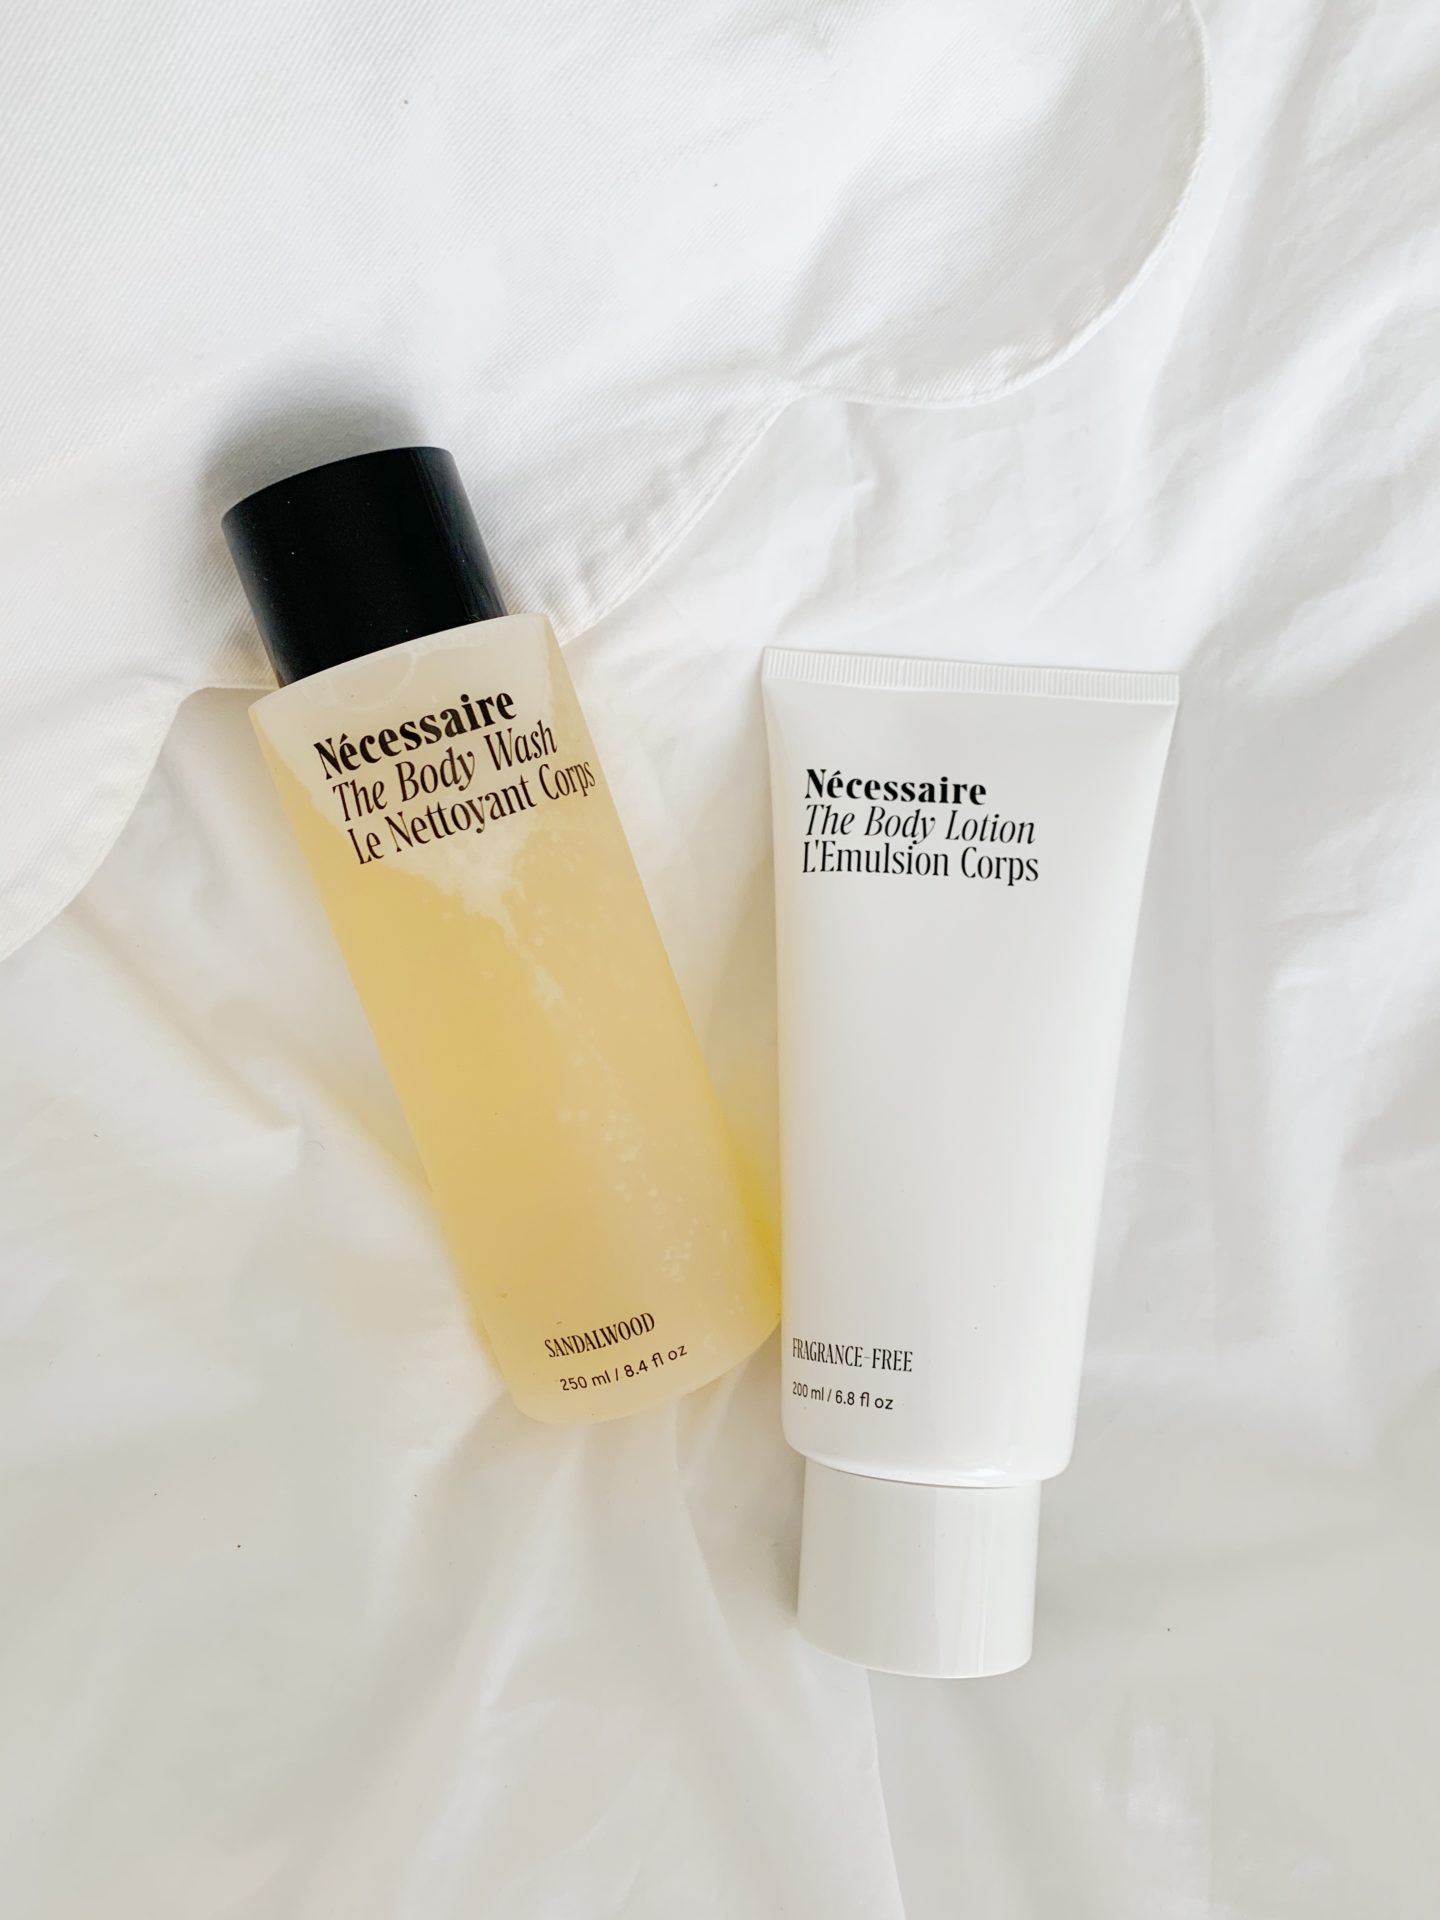 Emily Lucille Nécessaire Body Wash, Body Lotion and Body Scrub Review 